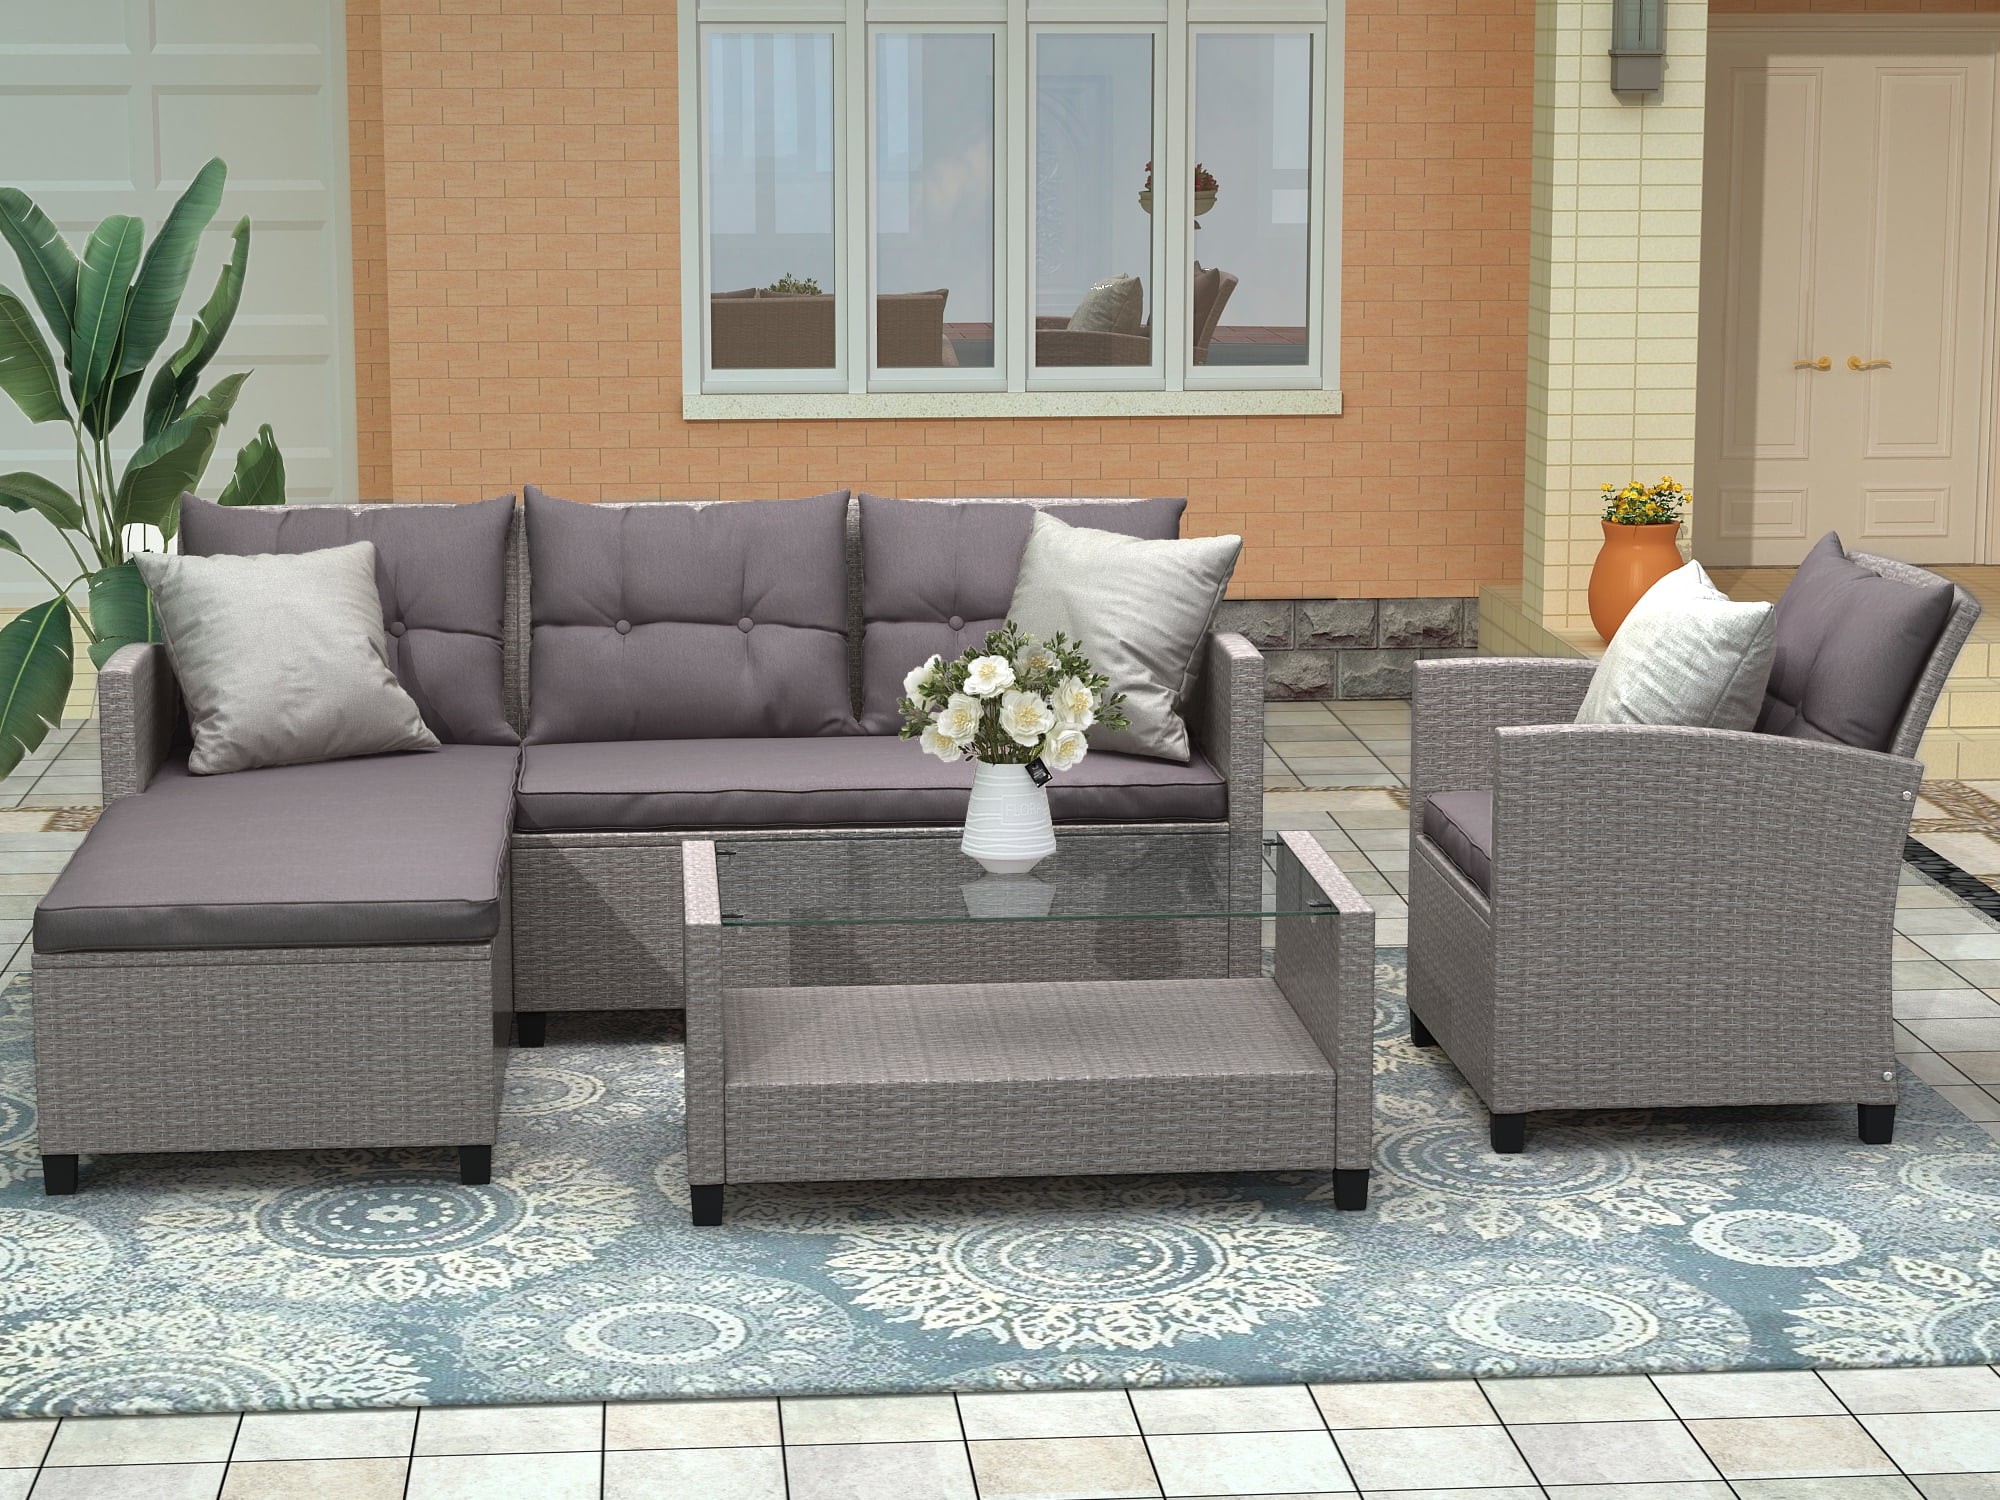 Patio Conversation Set, 4 Piece Outdoor Wicker Furniture Set with Loveseat Sofa, Lounge Chair, Wicker Chair, Coffee Table, All-Weather Patio Sectional Sofa Set with Cushions for Backyard Garden Pool